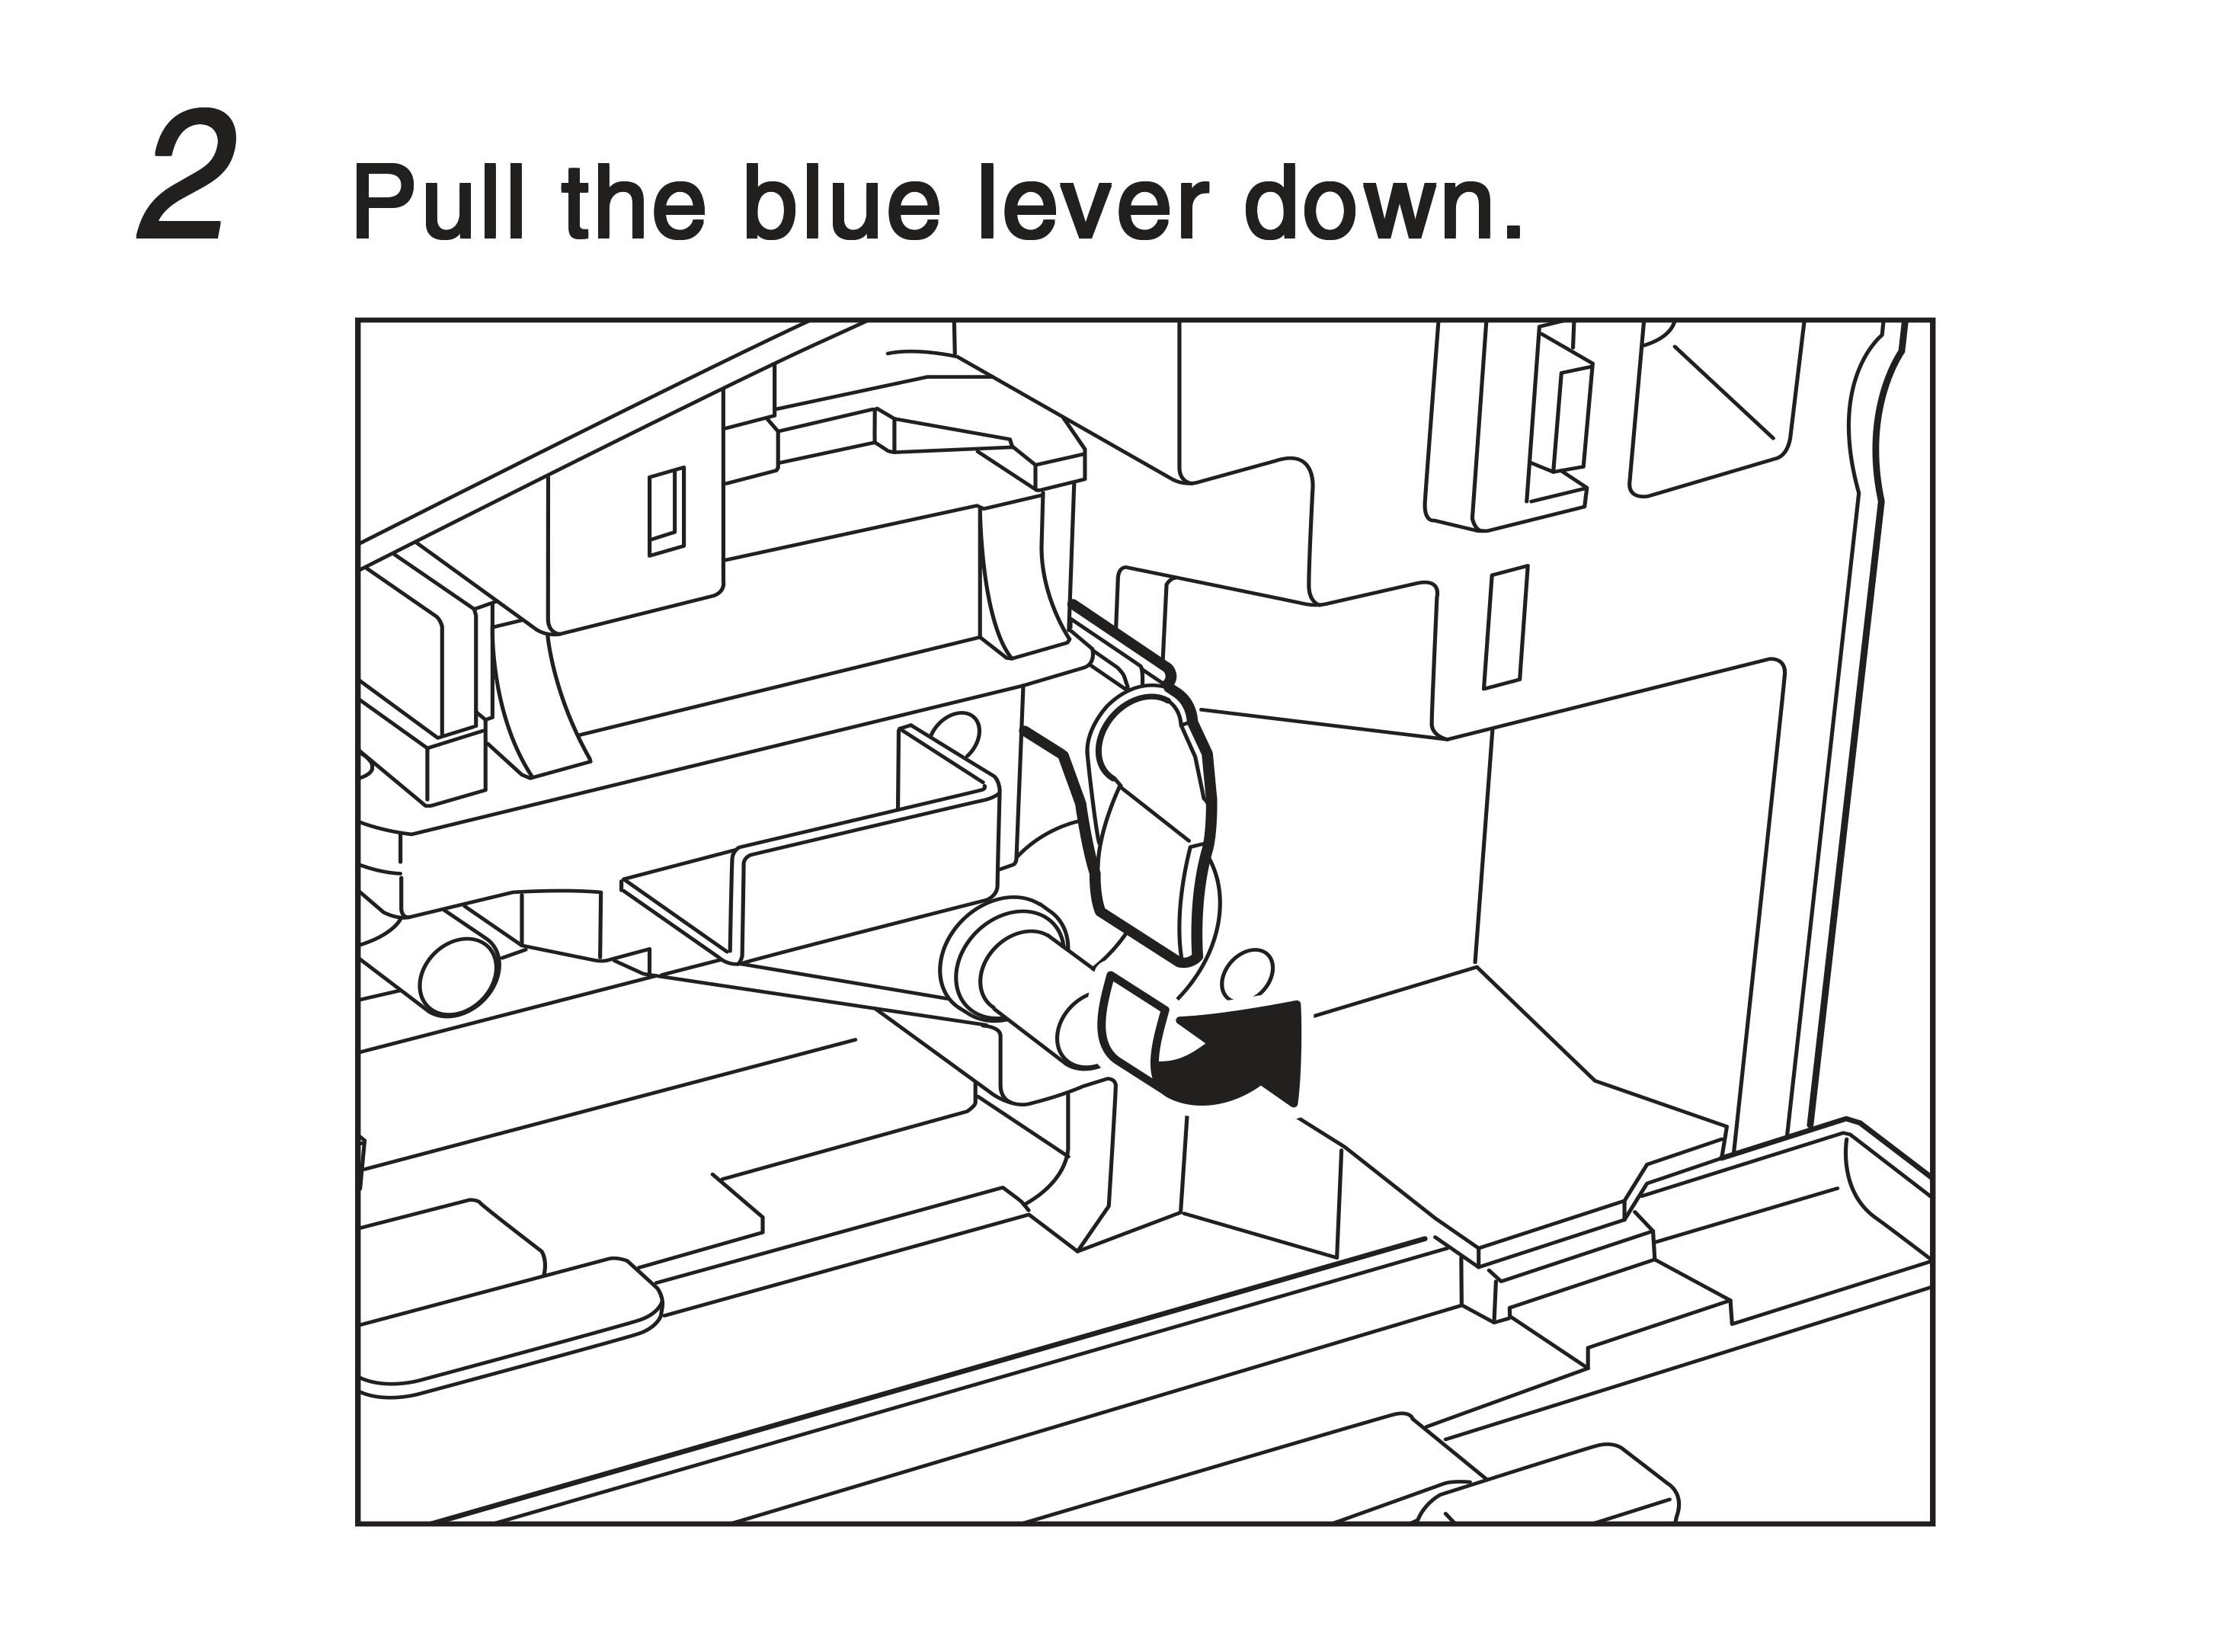 2. Pull the blue lever down.